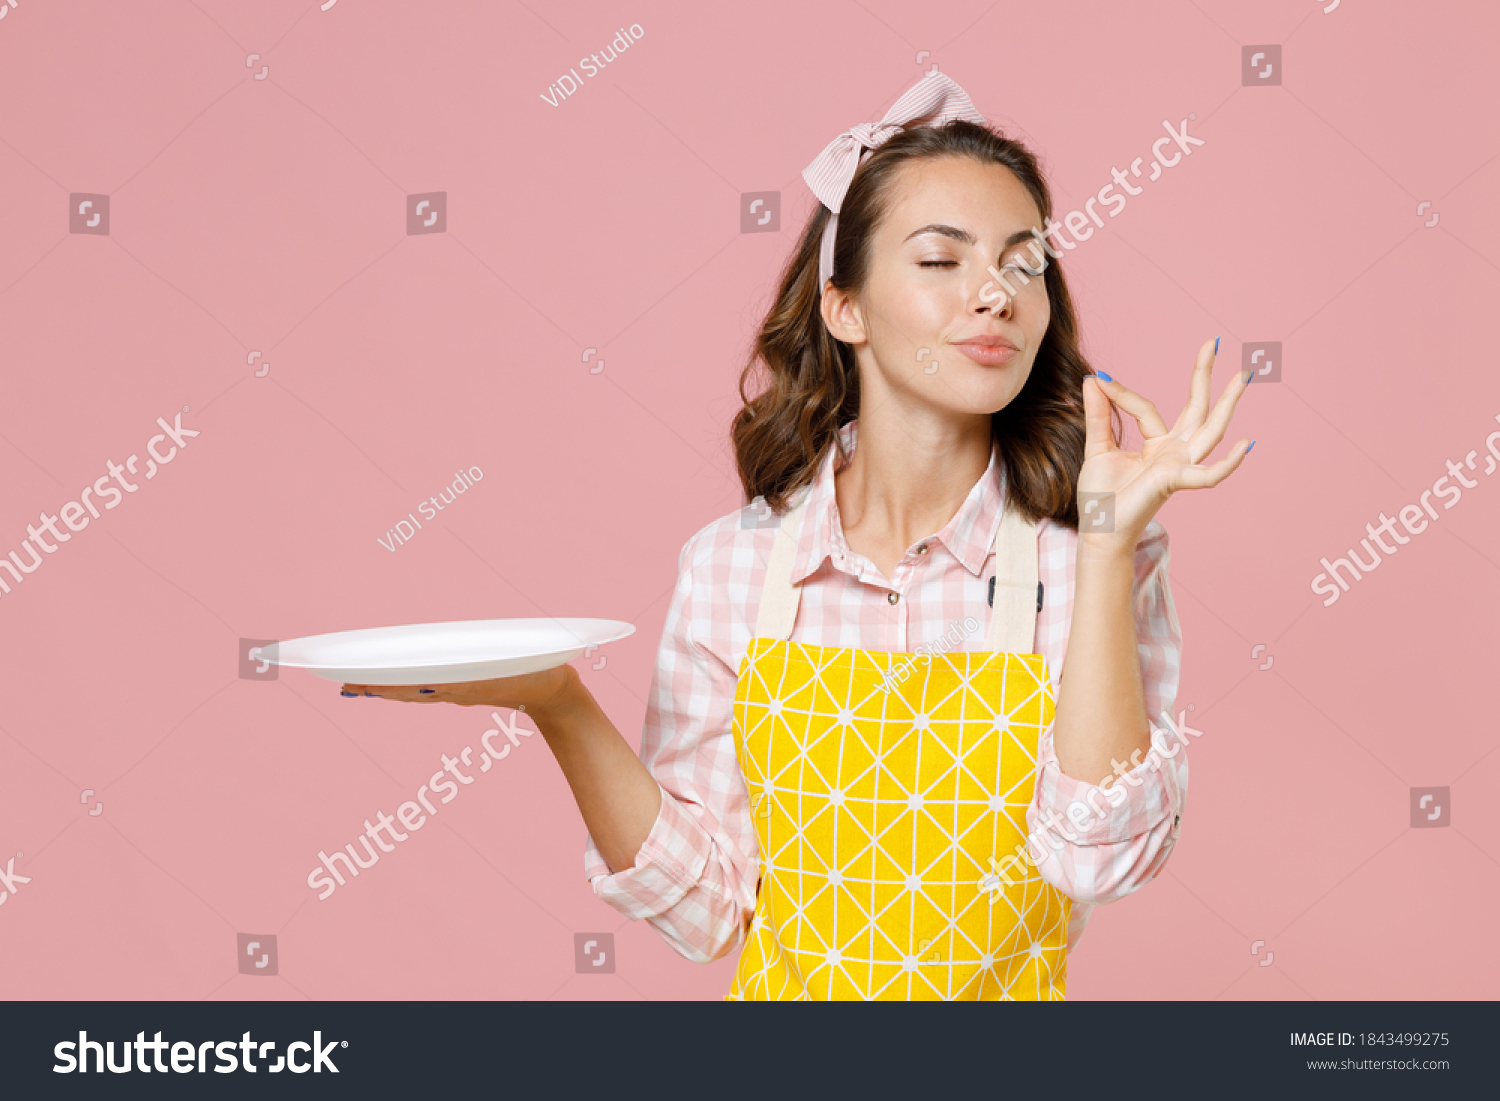 Cute young woman housewife in yellow apron hold empty plate making okay taste delight sign keeping eyes closed doing housework isolated on pastel pink background studio portrait. Housekeeping concept #1843499275